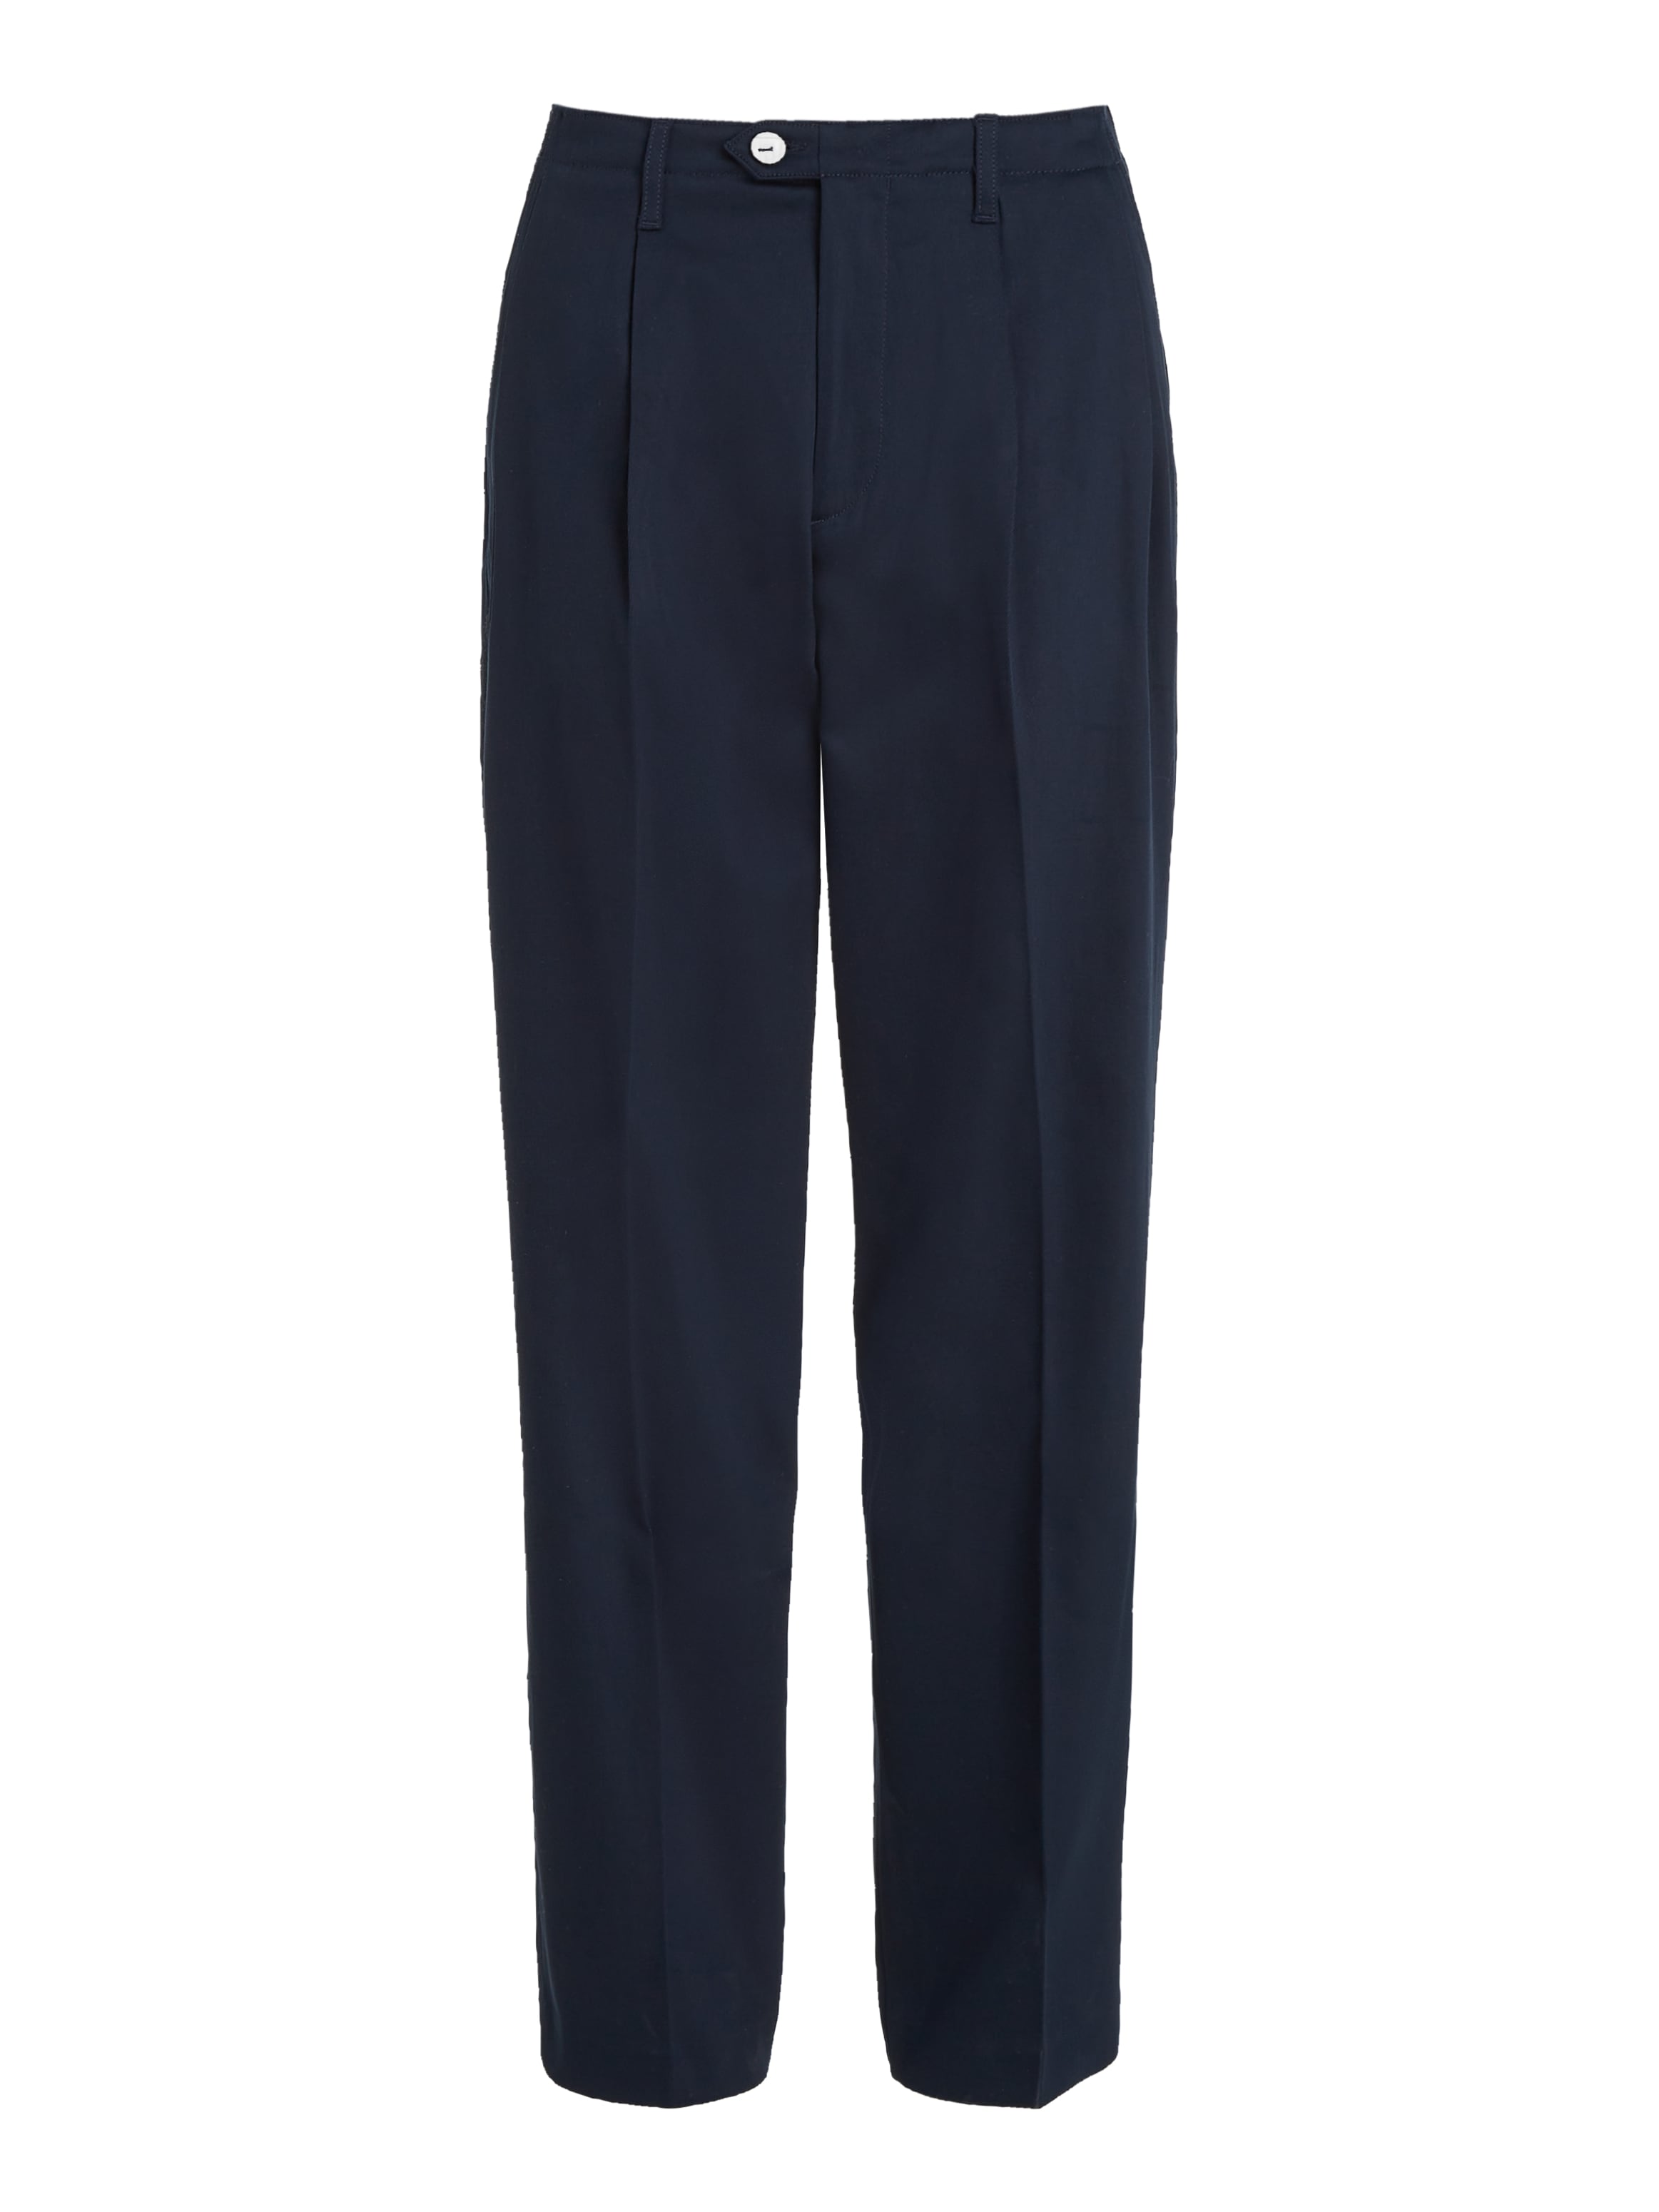 Tommy Hilfiger Chinohose »RELAXED STRAIGHT CHINO PANT«, mit Logostickerei